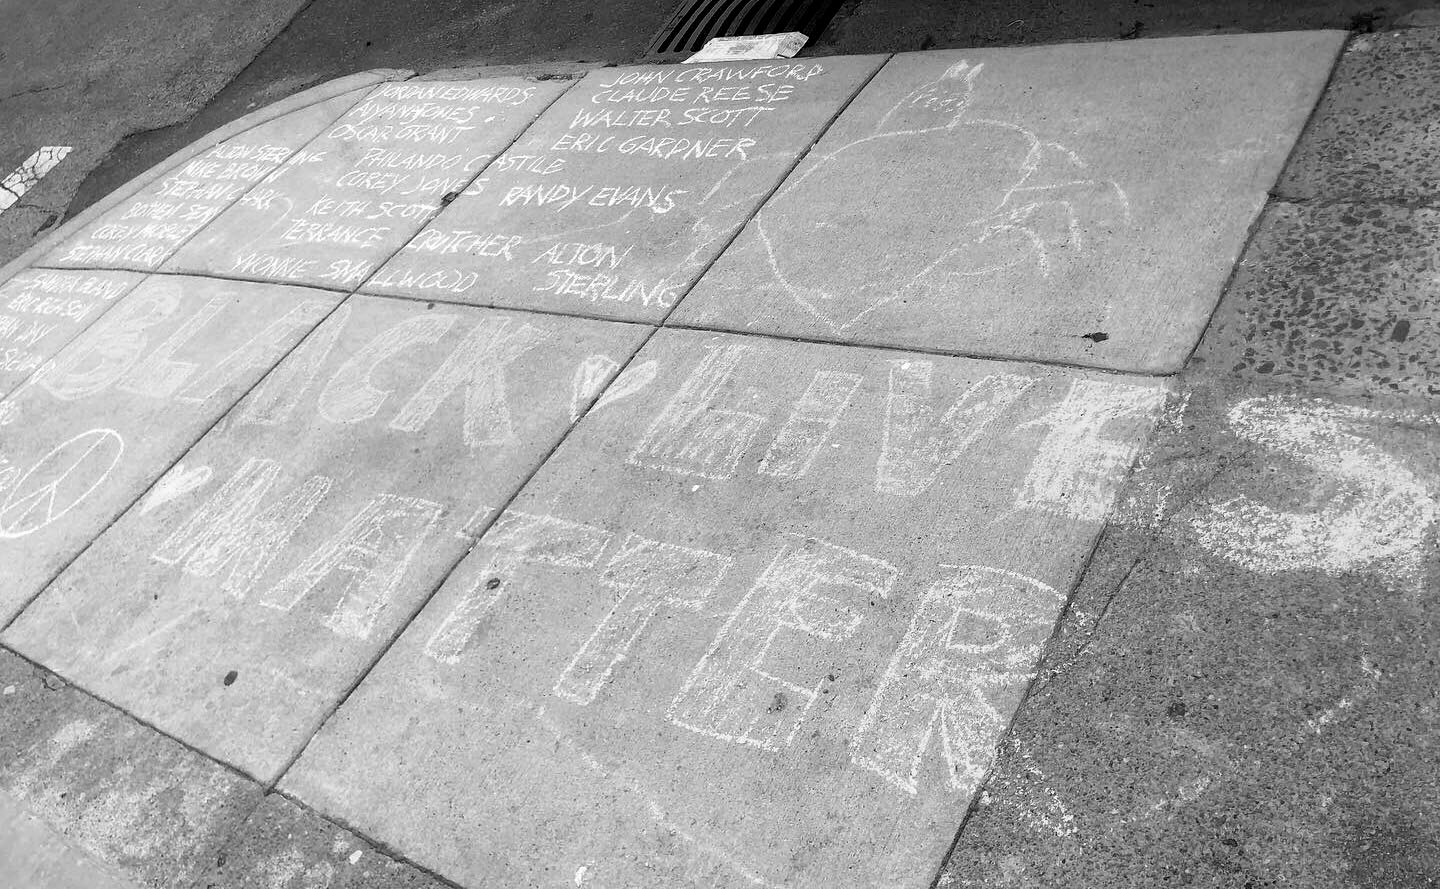 "Black Lives Matter" written out in chalk on a sidewalk in Philadelphia, above the phrase are the names of Black individuals who have been killed by the police.